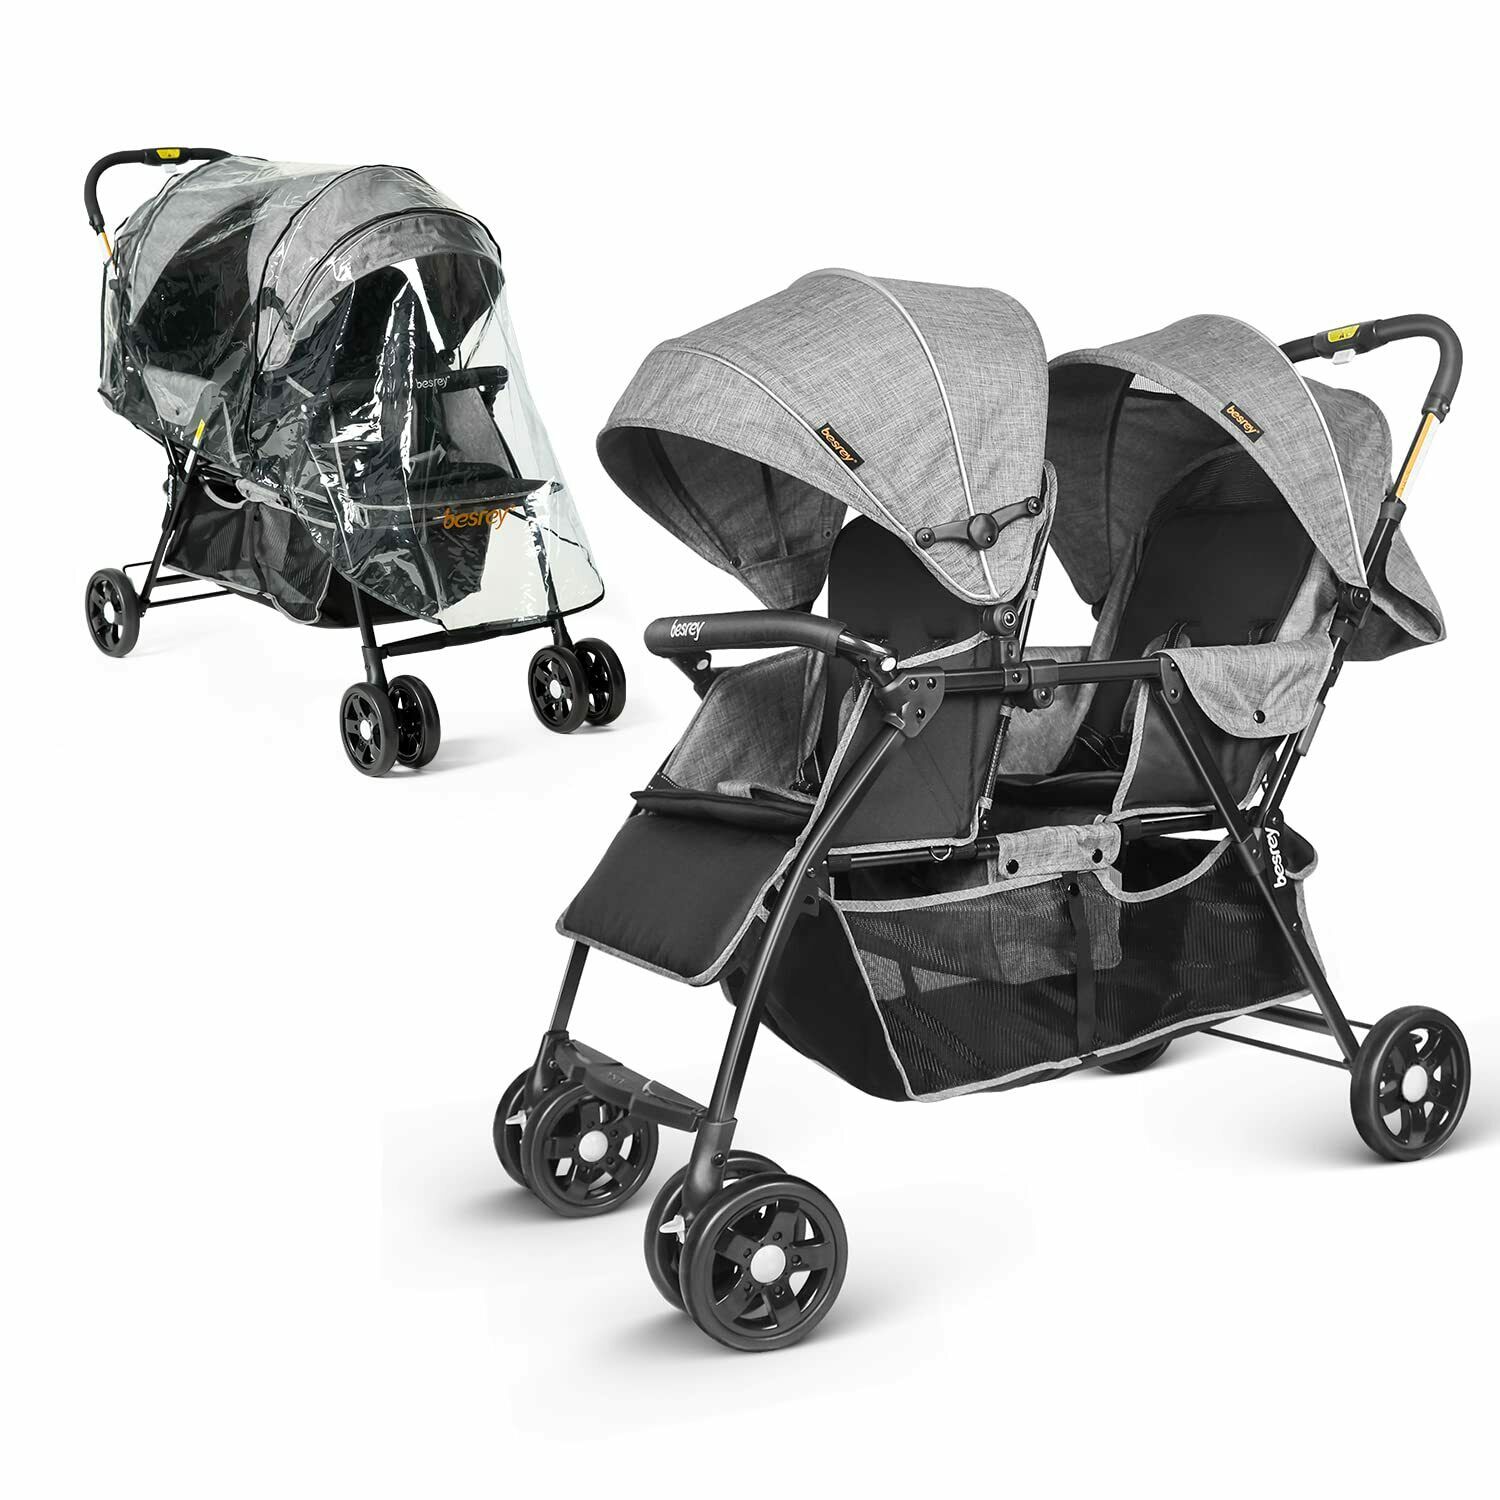 Besrey Foldable Double Stroller Lightweight Tandem Stroller with Free Rain Cover